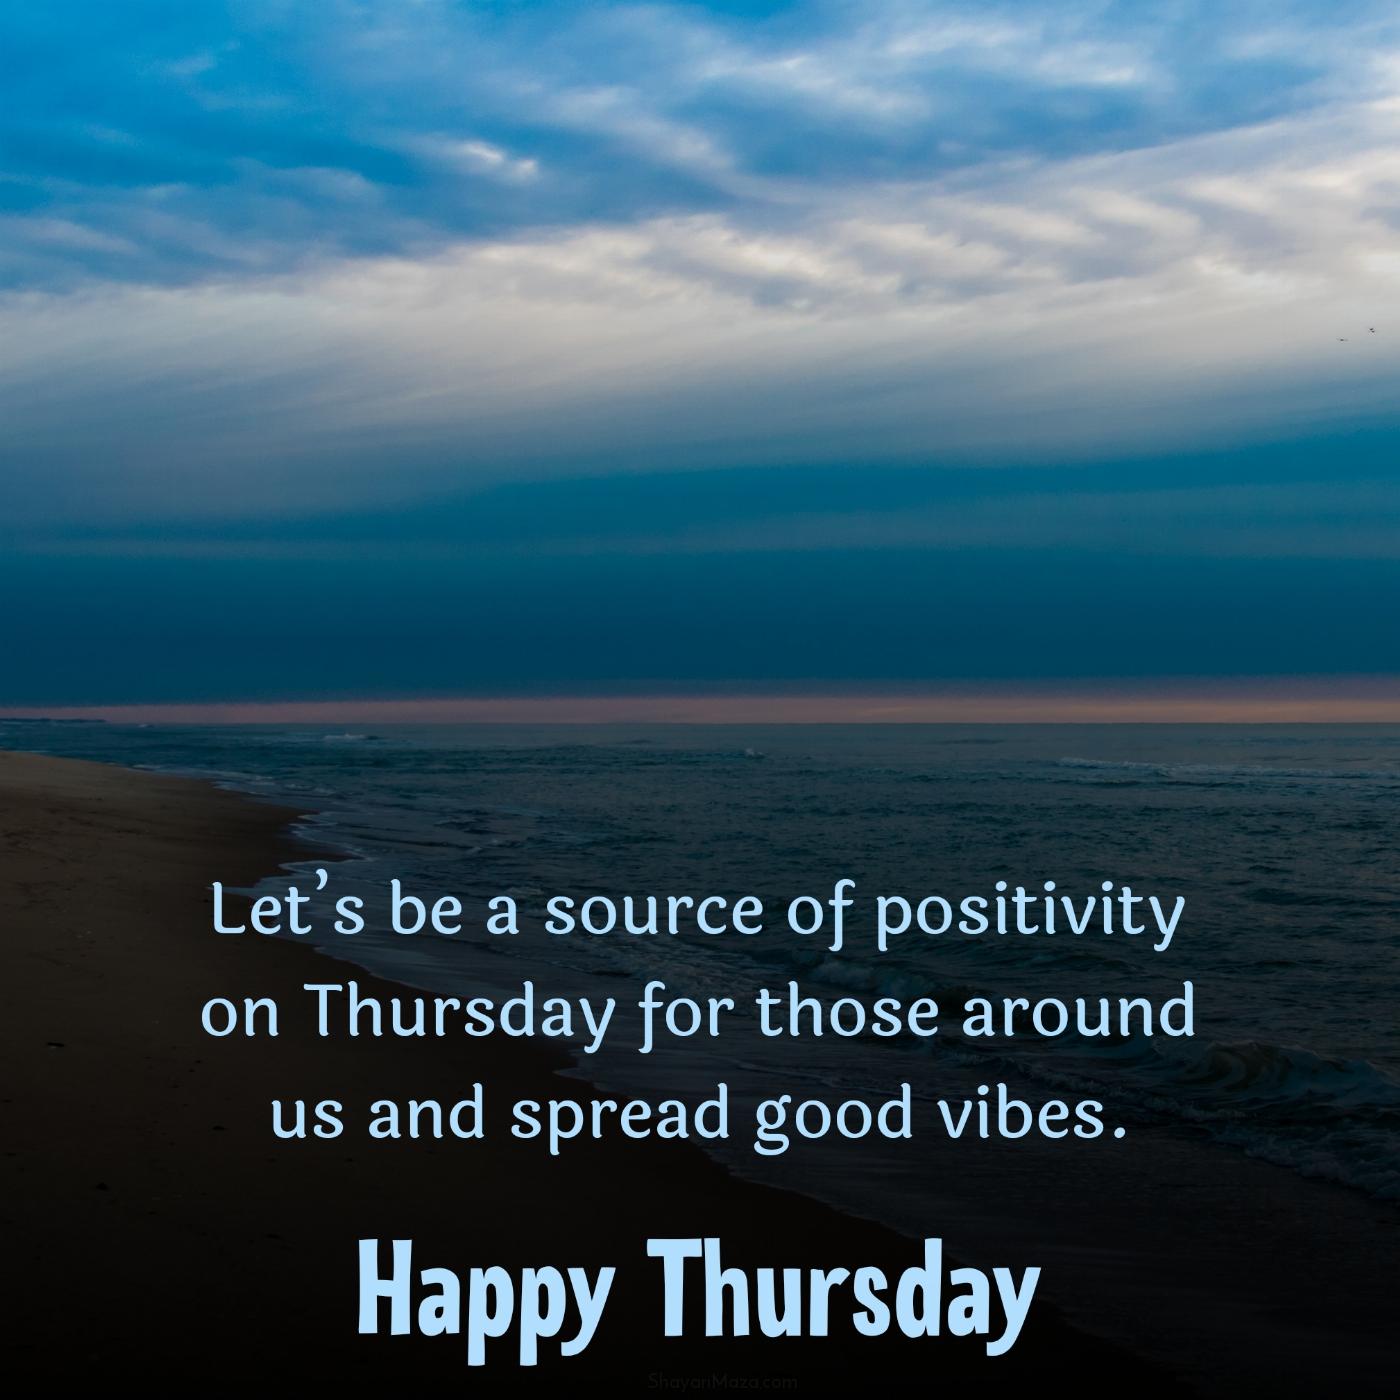 Lets be a source of positivity on Thursday for those around us